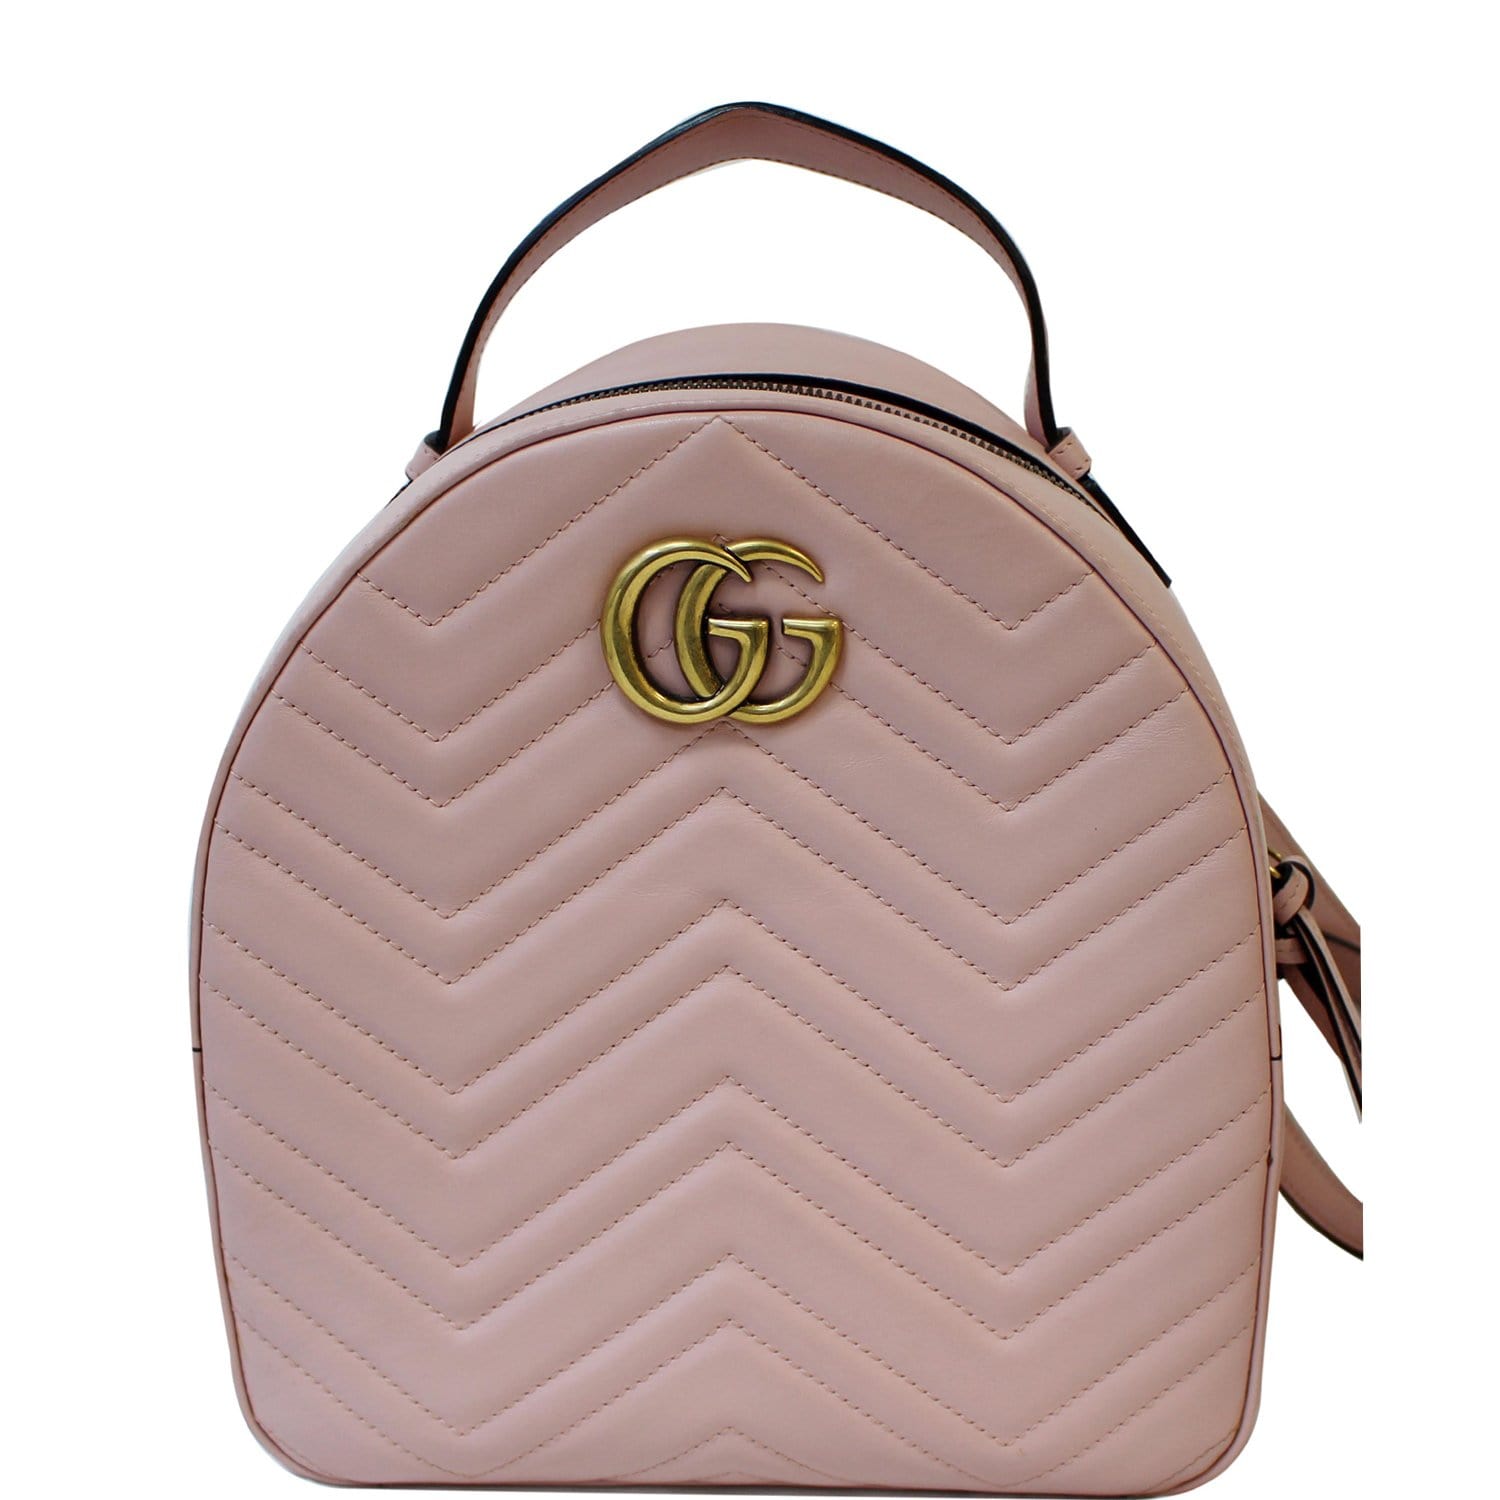 Gucci 476449 DVUQJ 5965 Women's Pink Pearly Peony Leather Backpack (GG2081)